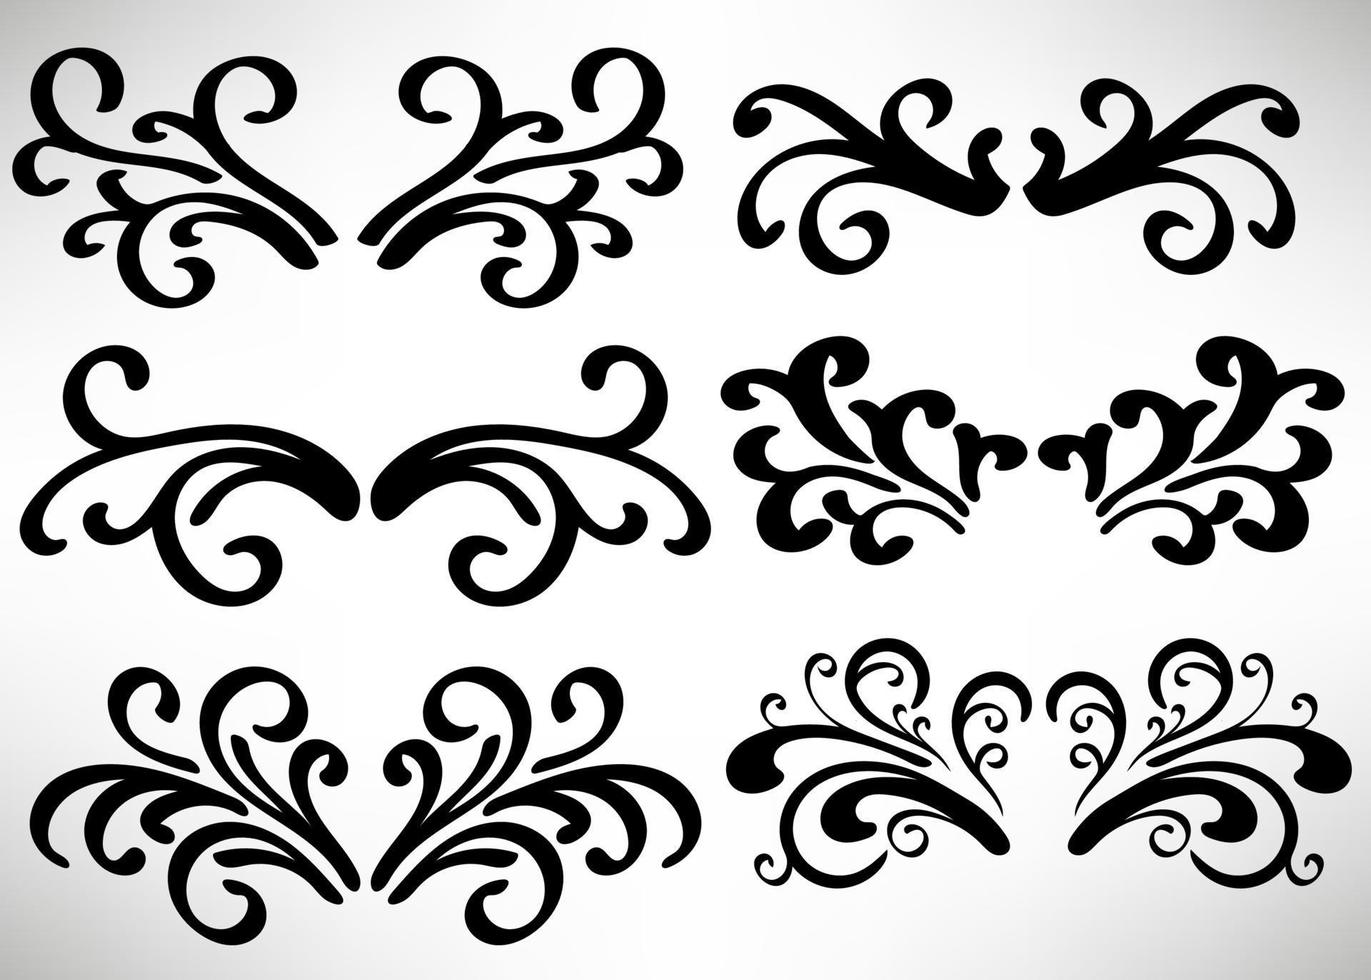 Abstract  black curly design element set isolated on white background. Dividers. Swirls. vector